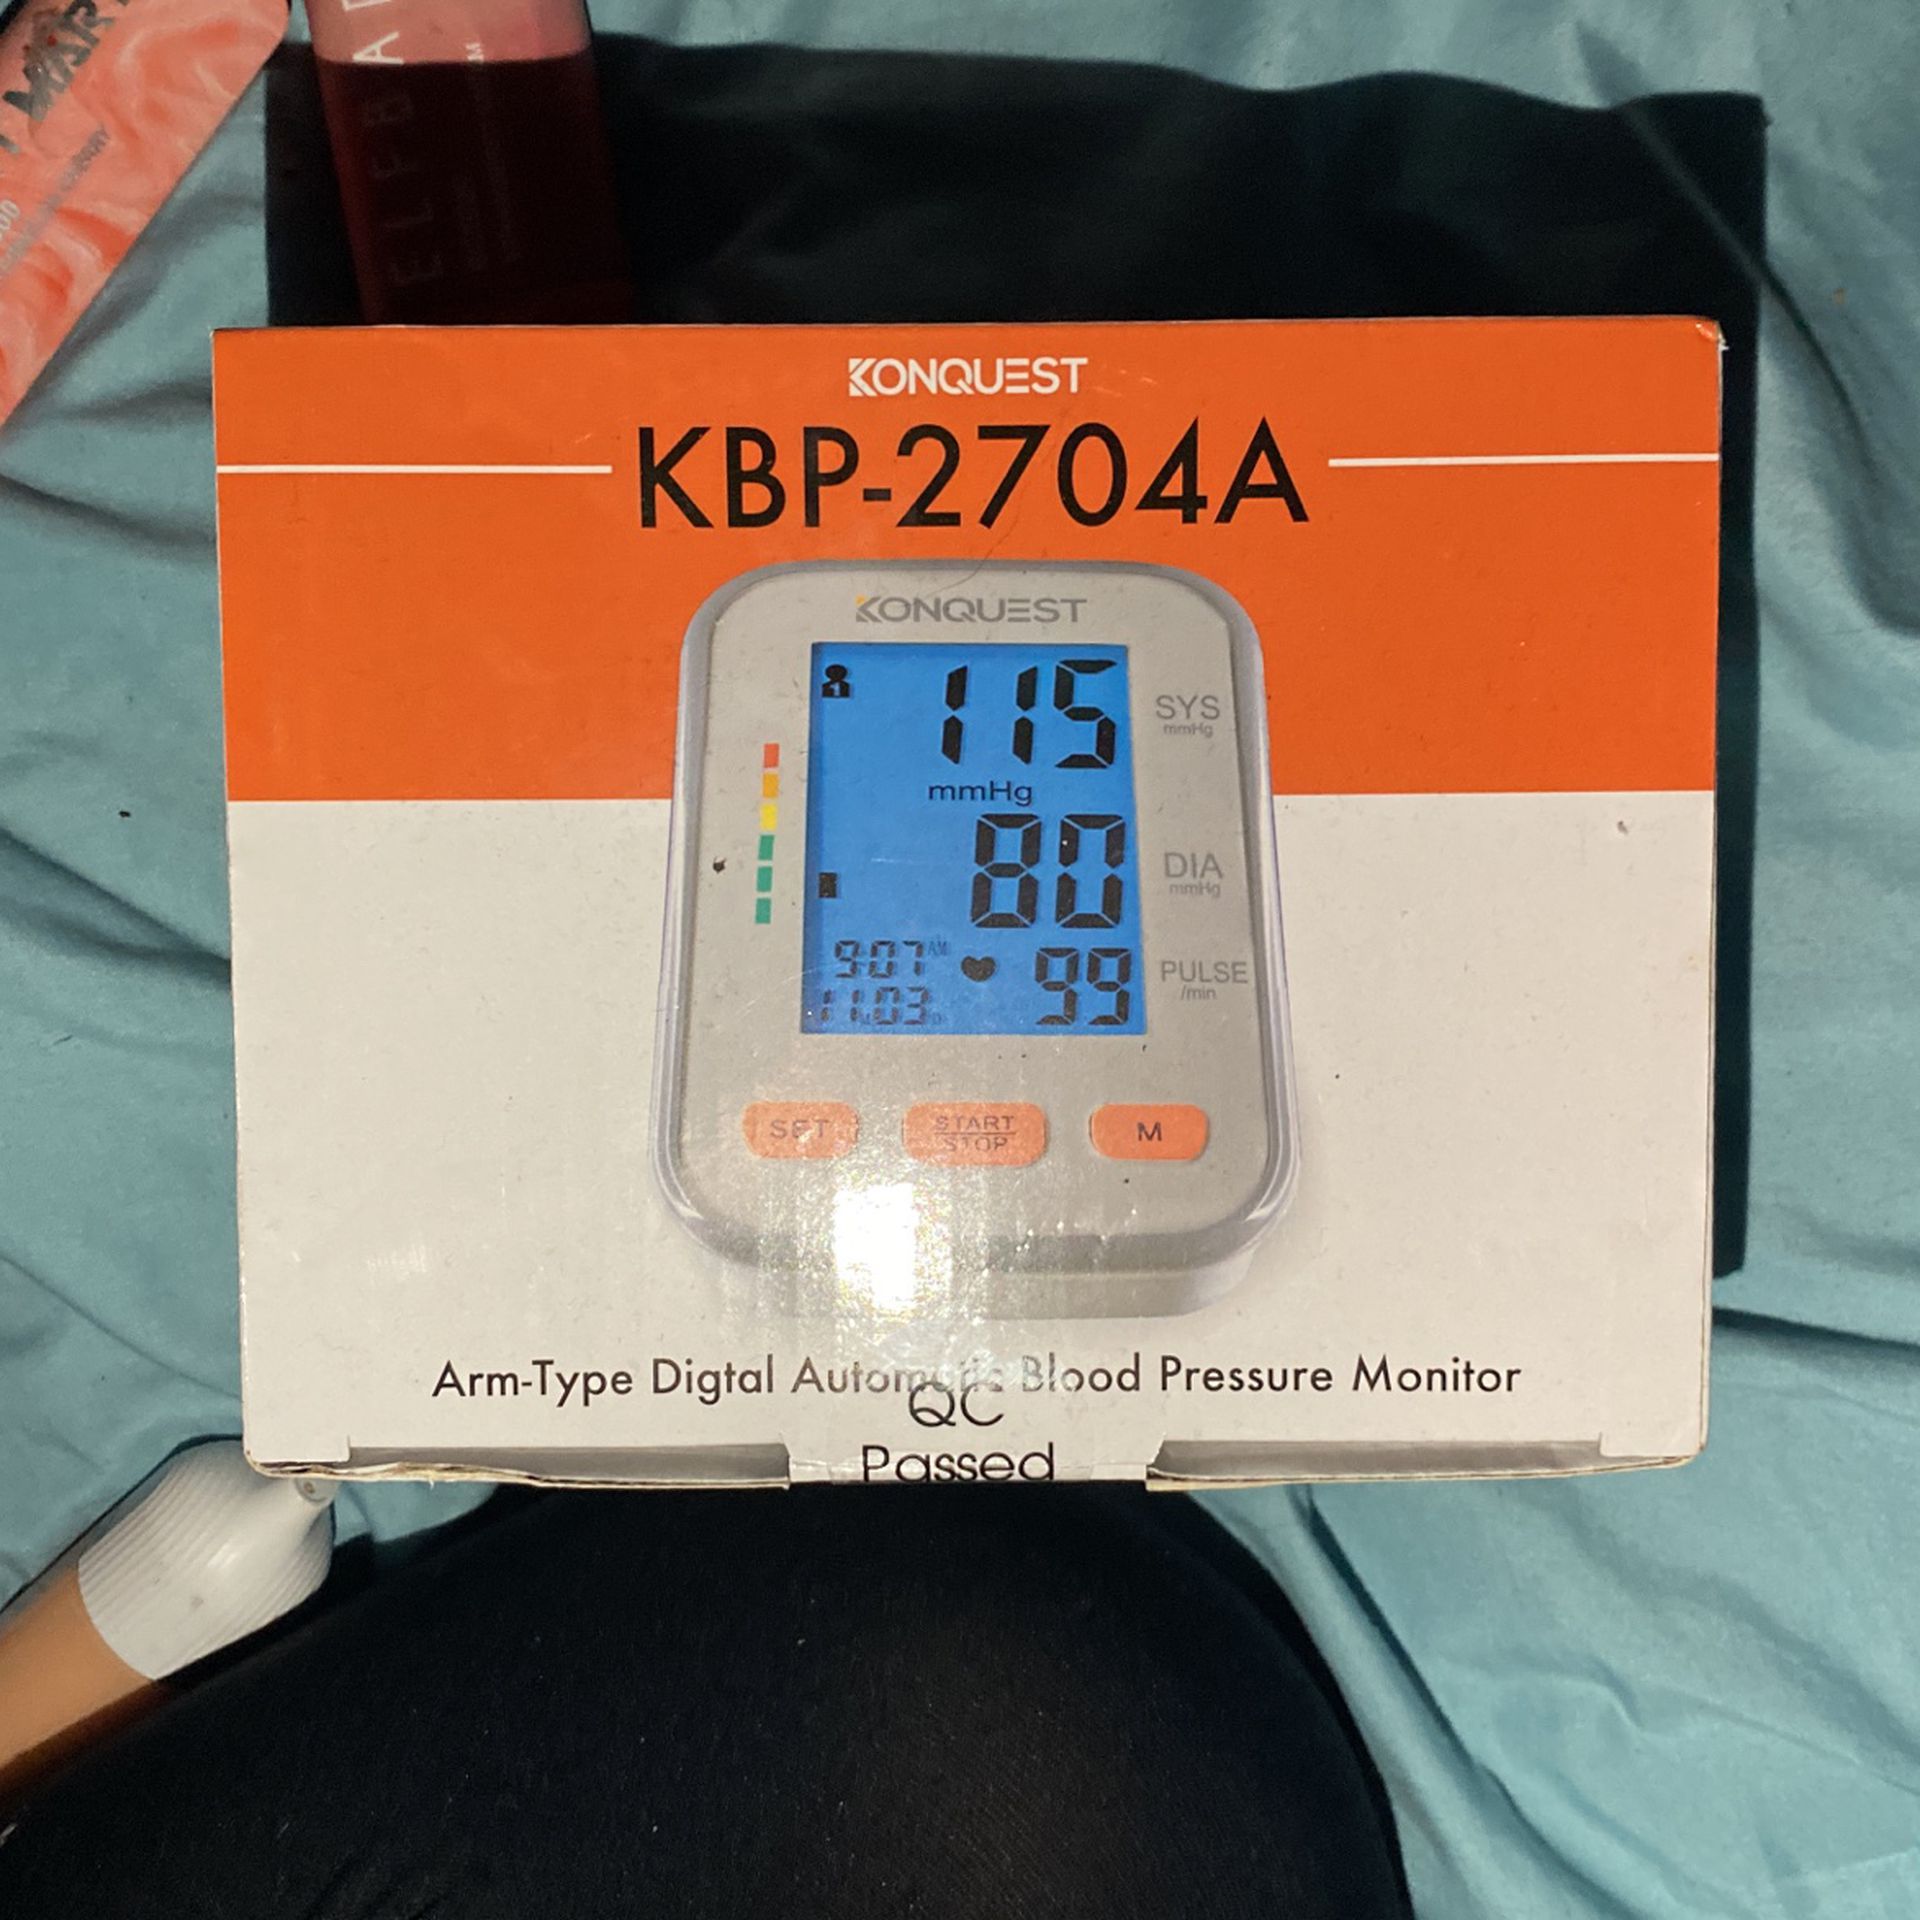 konquest KBP-2704A arm type digital automatic blood pressure monitor for  Sale in Revere, MA - OfferUp